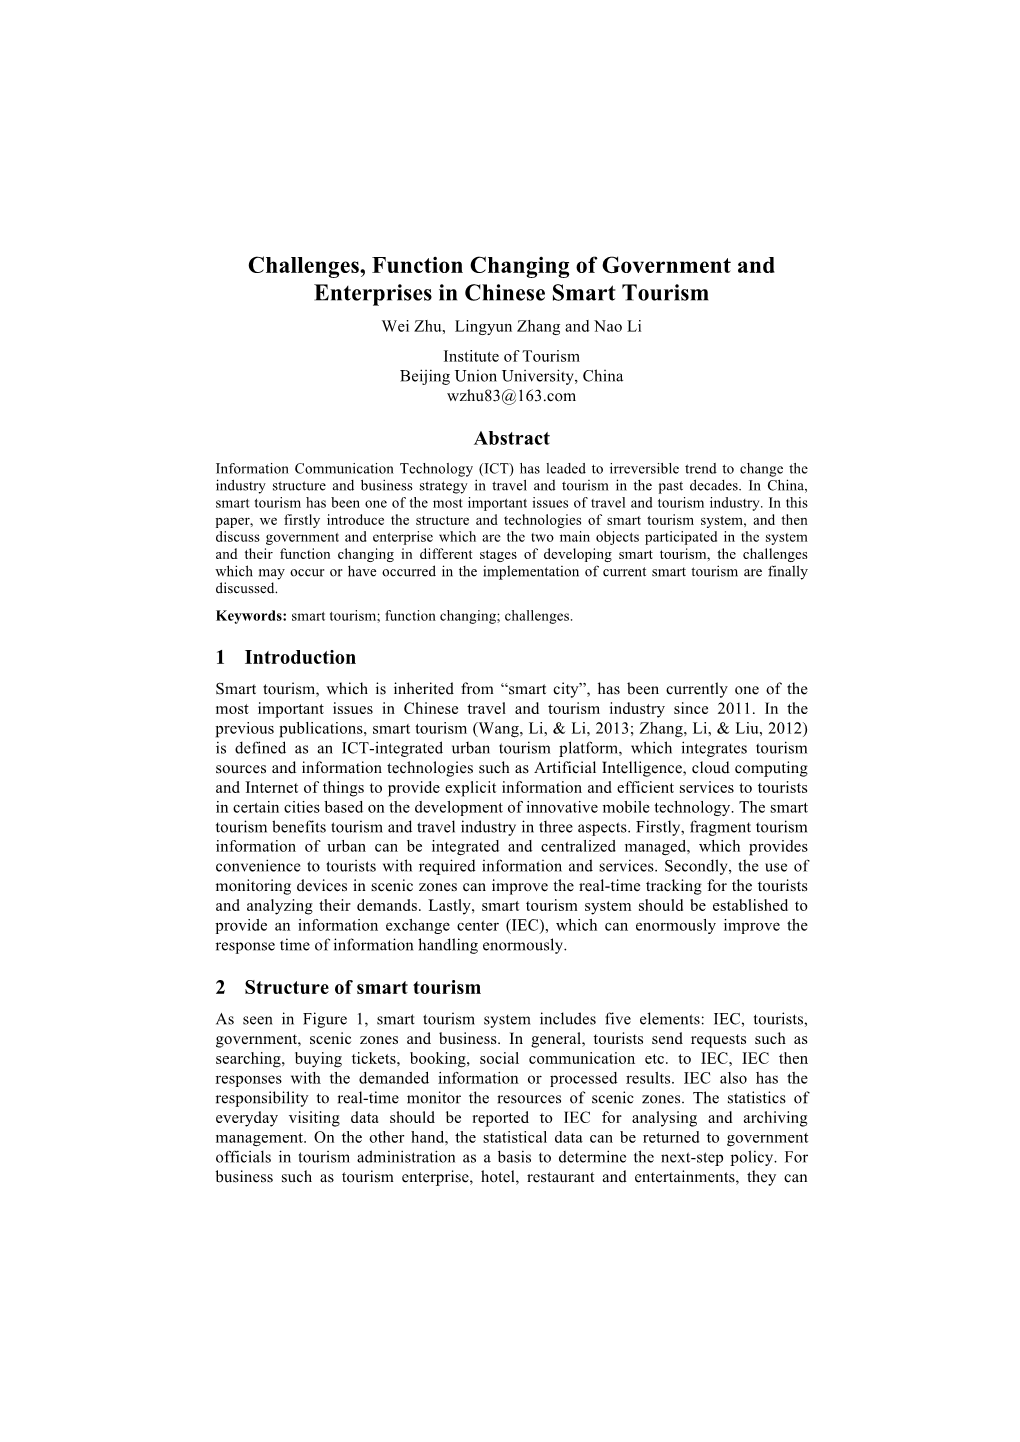 Challenges, Function Changing of Government and Enterprises In